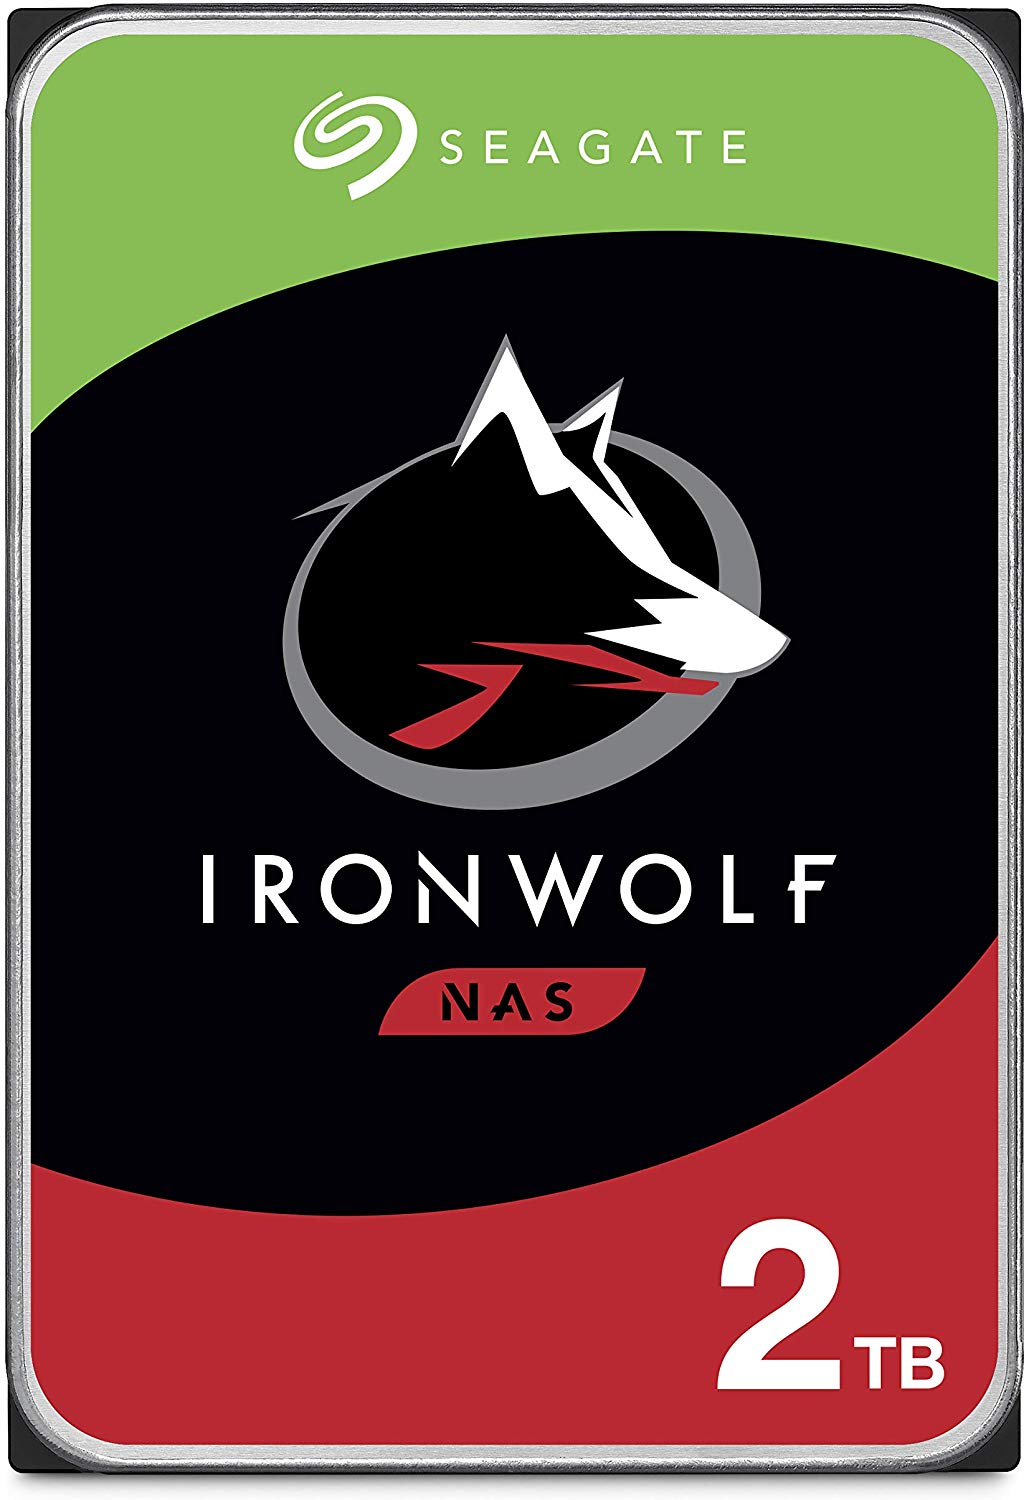 SEAGATE IRONWOLF 2 TB 64MB SATA3 180TB/Y NAS (ST2000VN004)